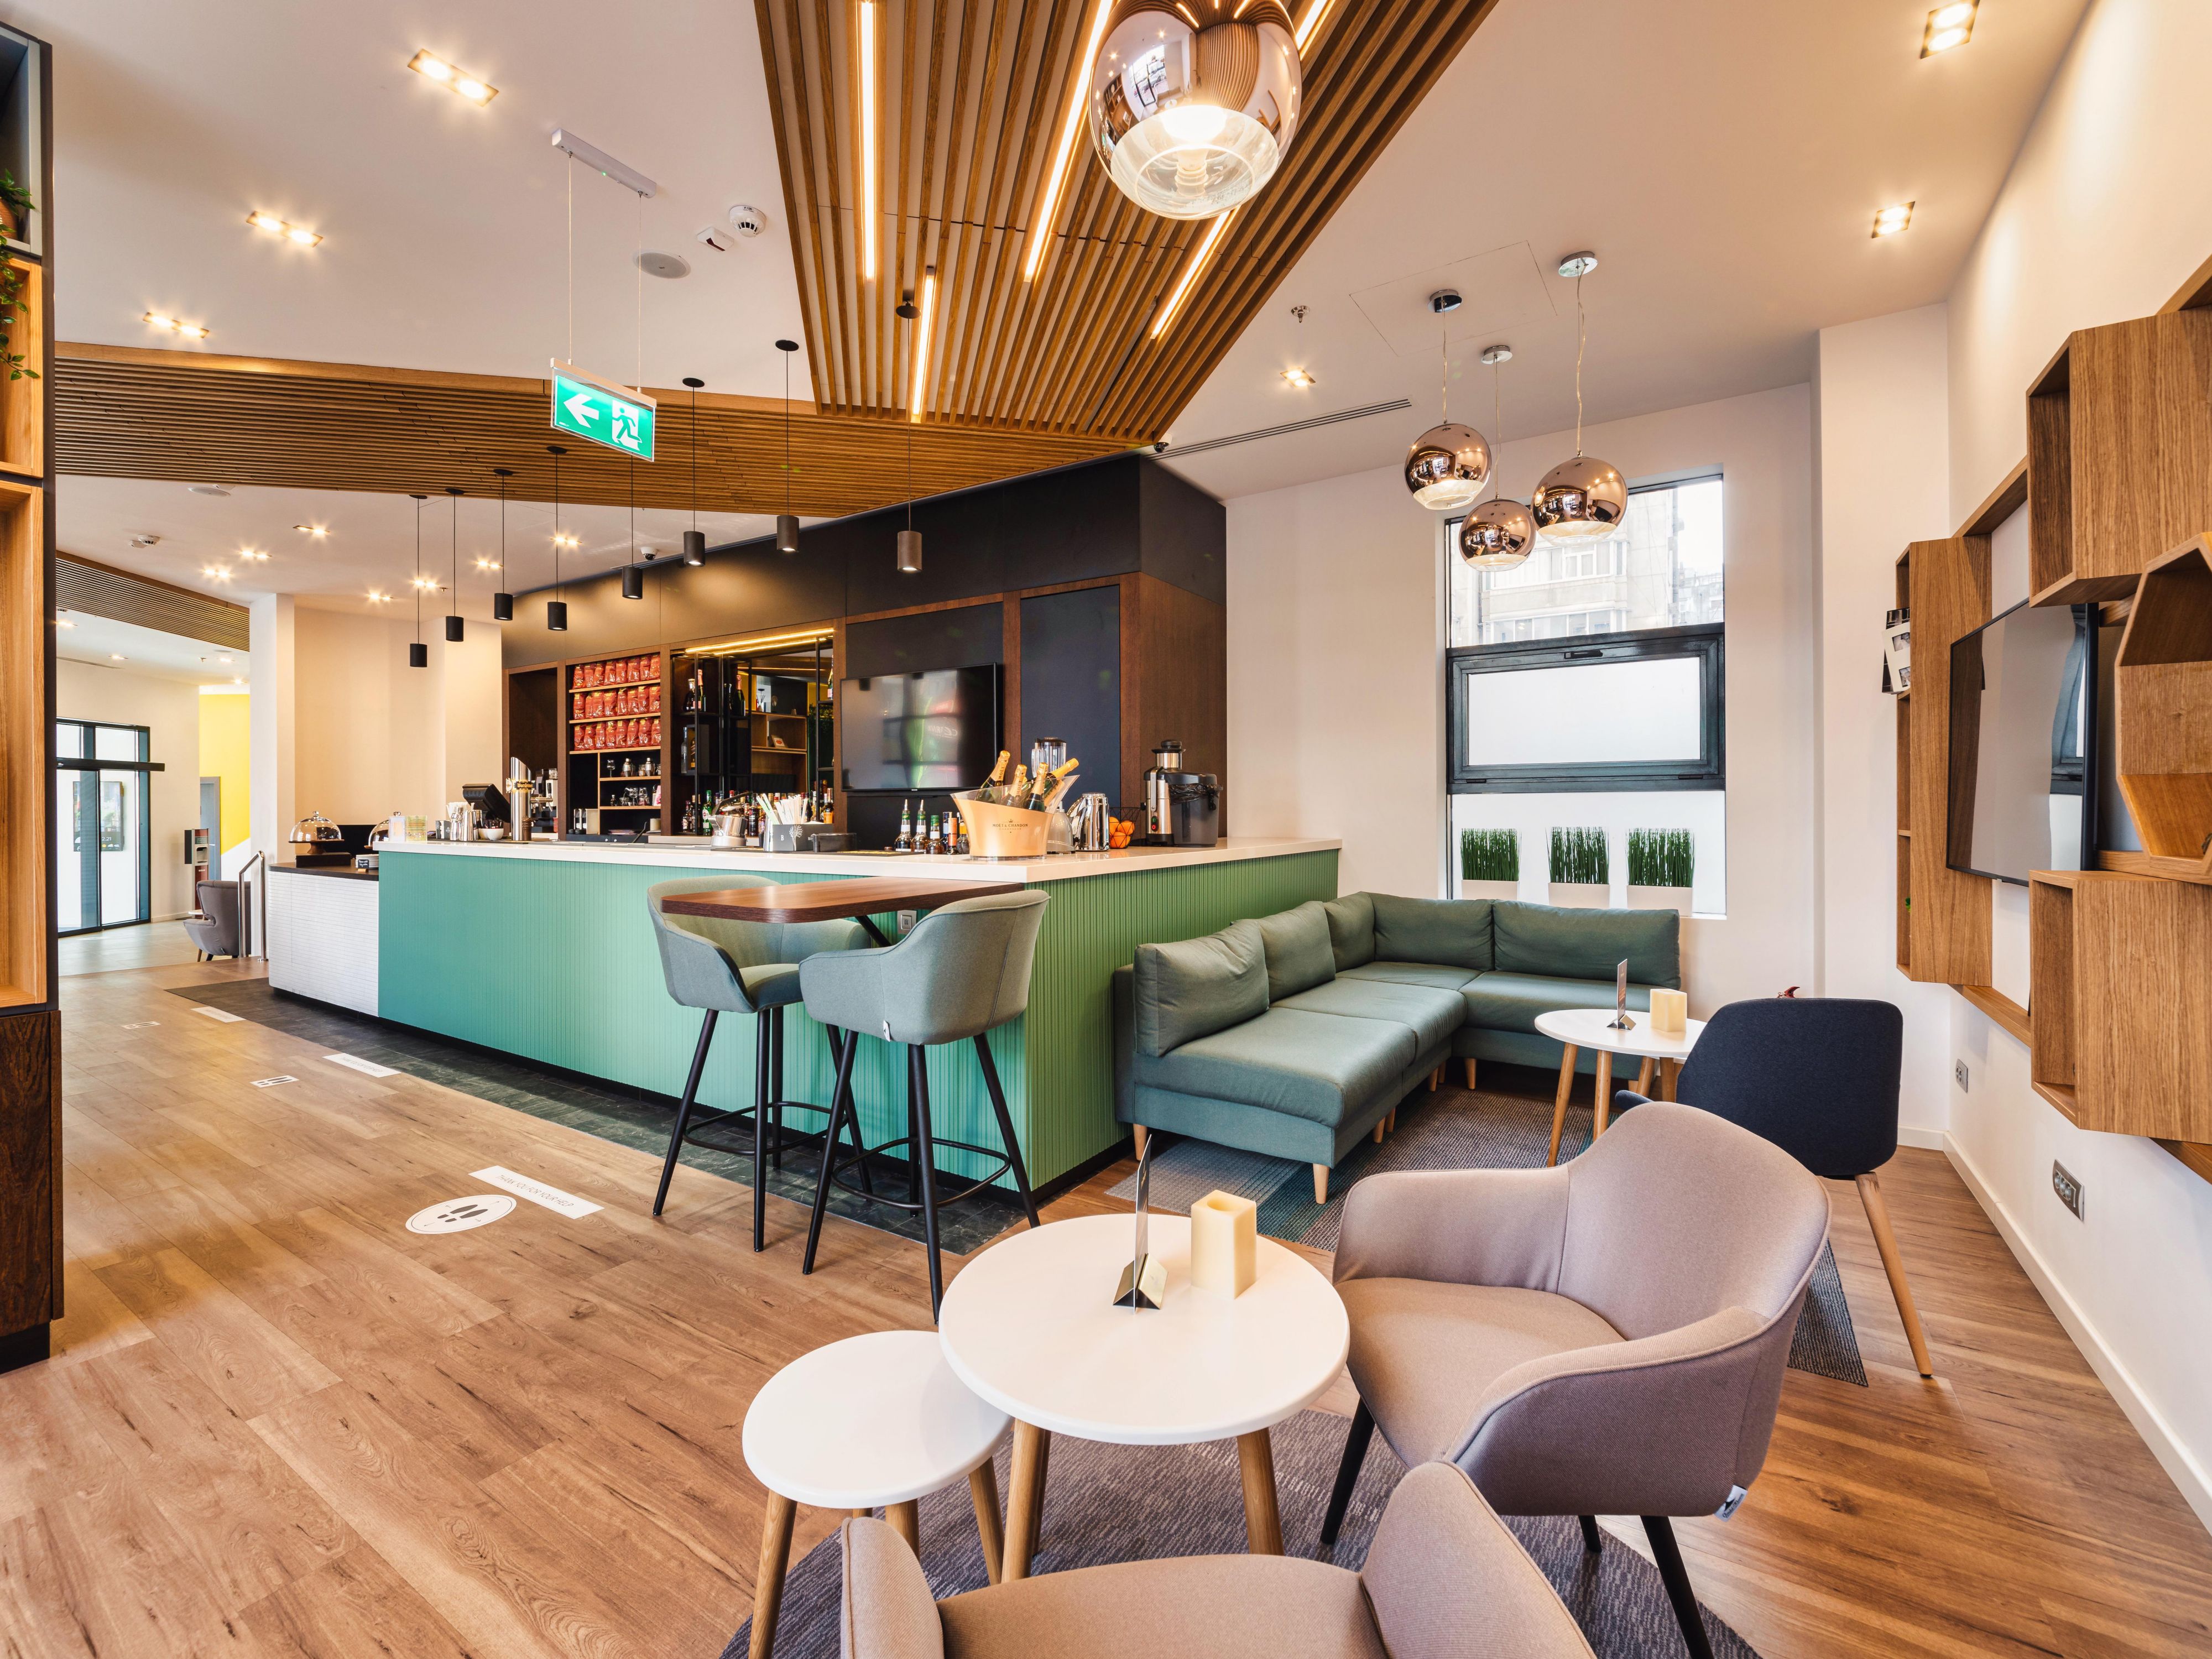 Joy Café was designed as the ideal place to relax, a getaway from the hustle and bustle of the city life, the perfect location for an enjoyable dinner or a well-deserved break between meetings.